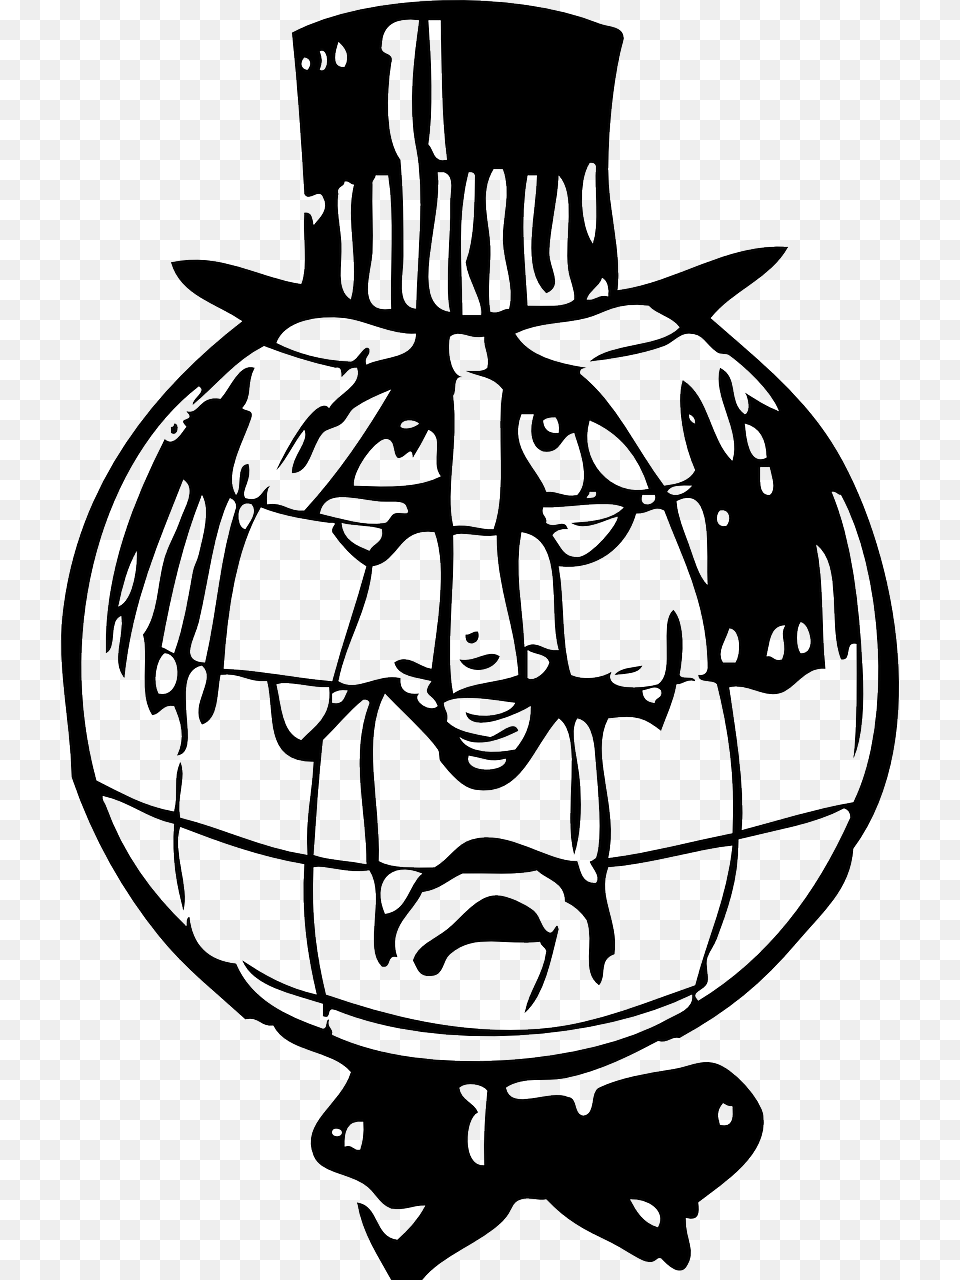 World Globe As A Man Face Wearing A Hat Black And White Clipart Sad, Stencil, Baby, Person, Head Free Png Download